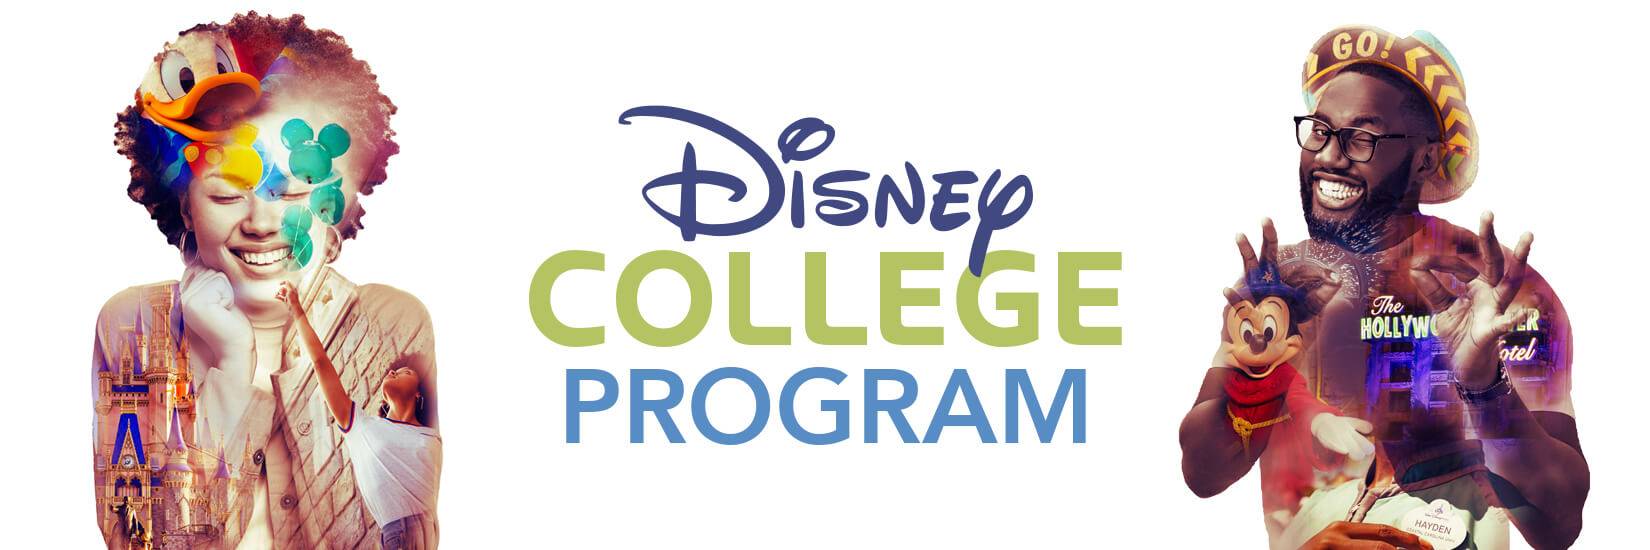 Two people covered in images from the Disney Theme Park in between the words "Disney College Program"